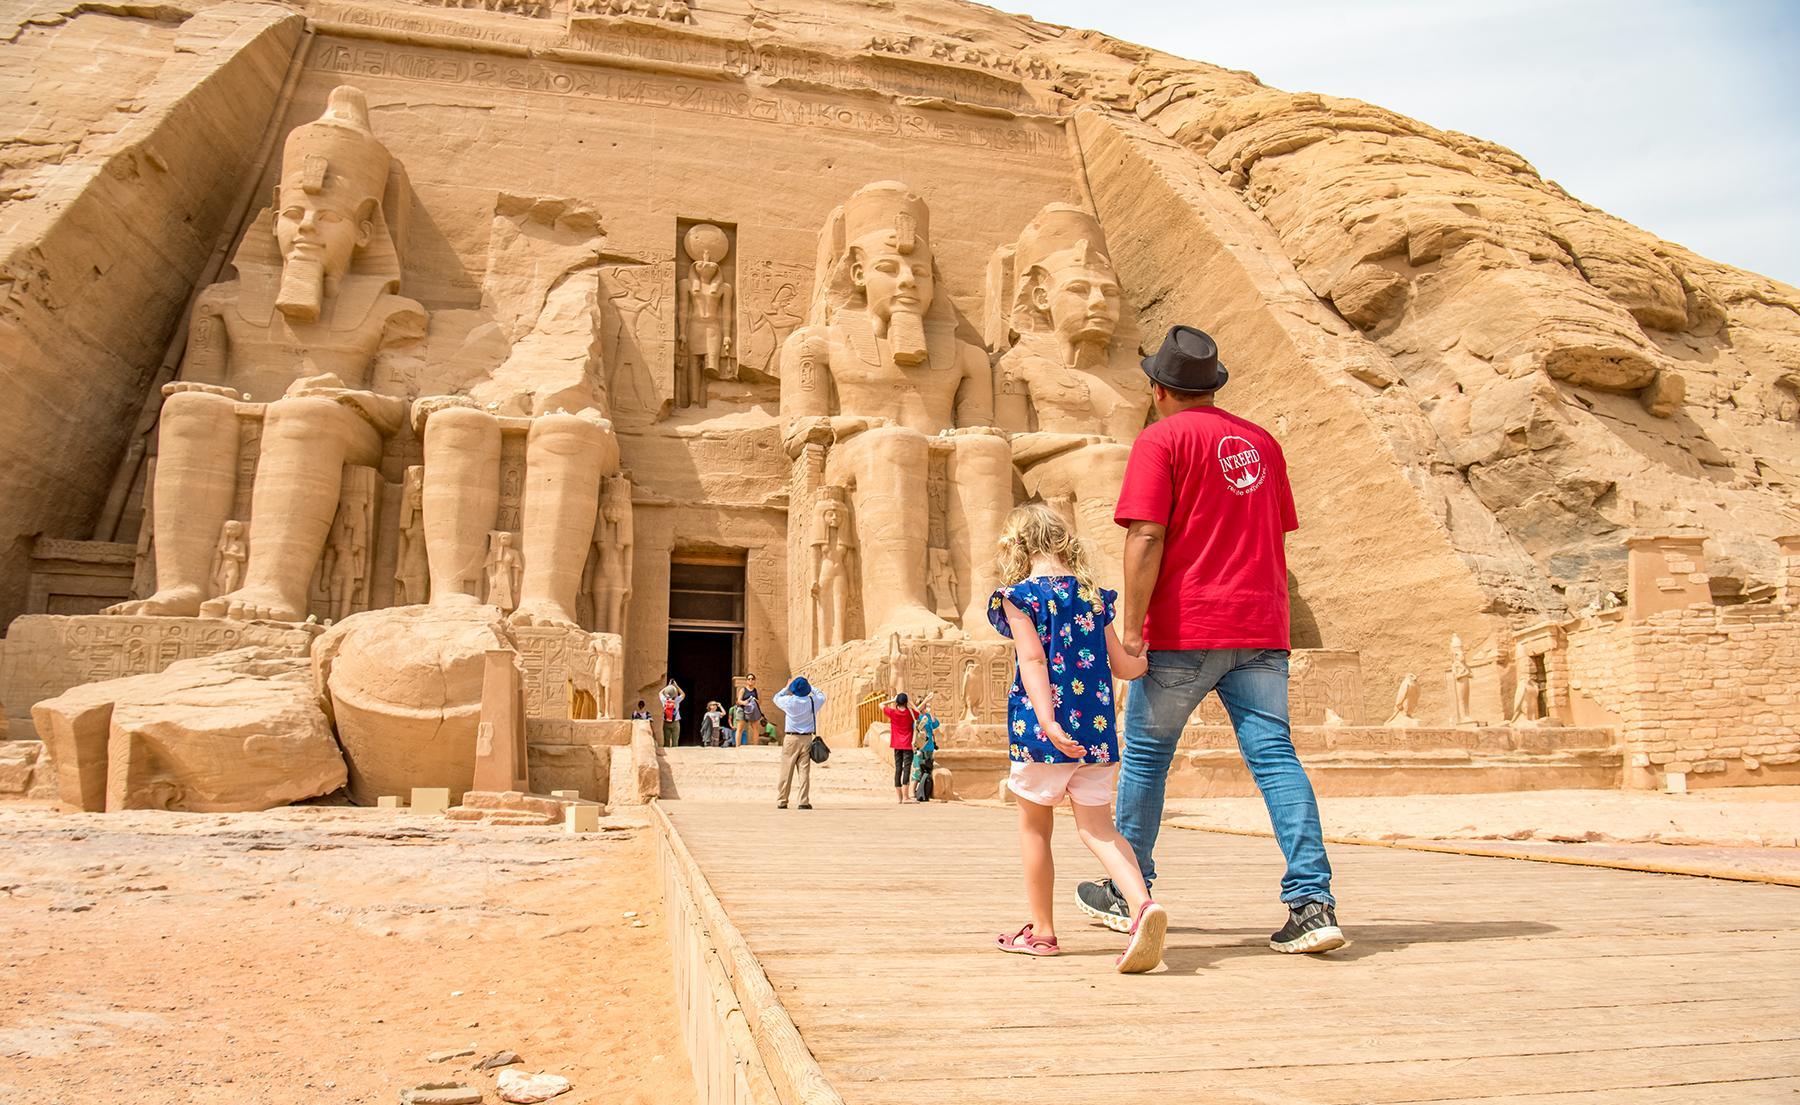 Egyptian Tourism Revenues Rise by $2.7 Billion in 2019